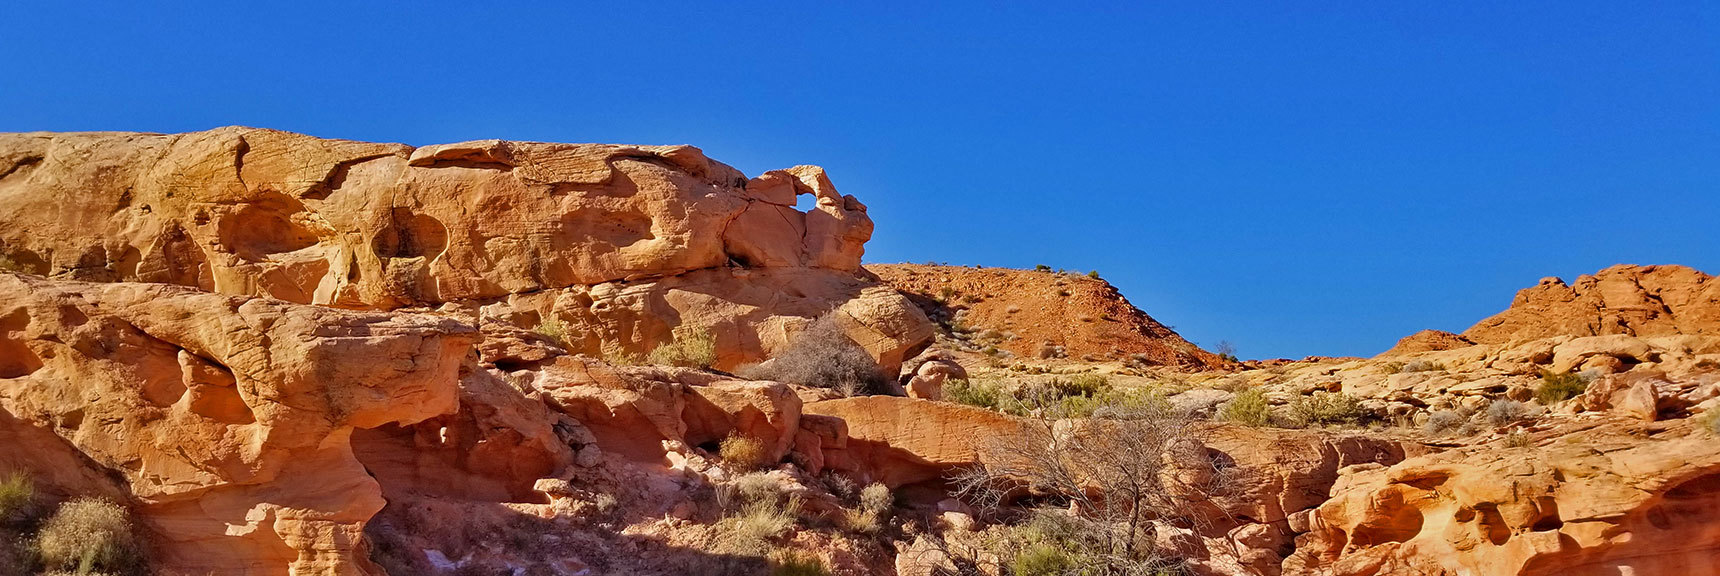 Beautiful Rock Formations on Prospect Trail Near White Domes Loop in Valley of Fire State Park, Nevada